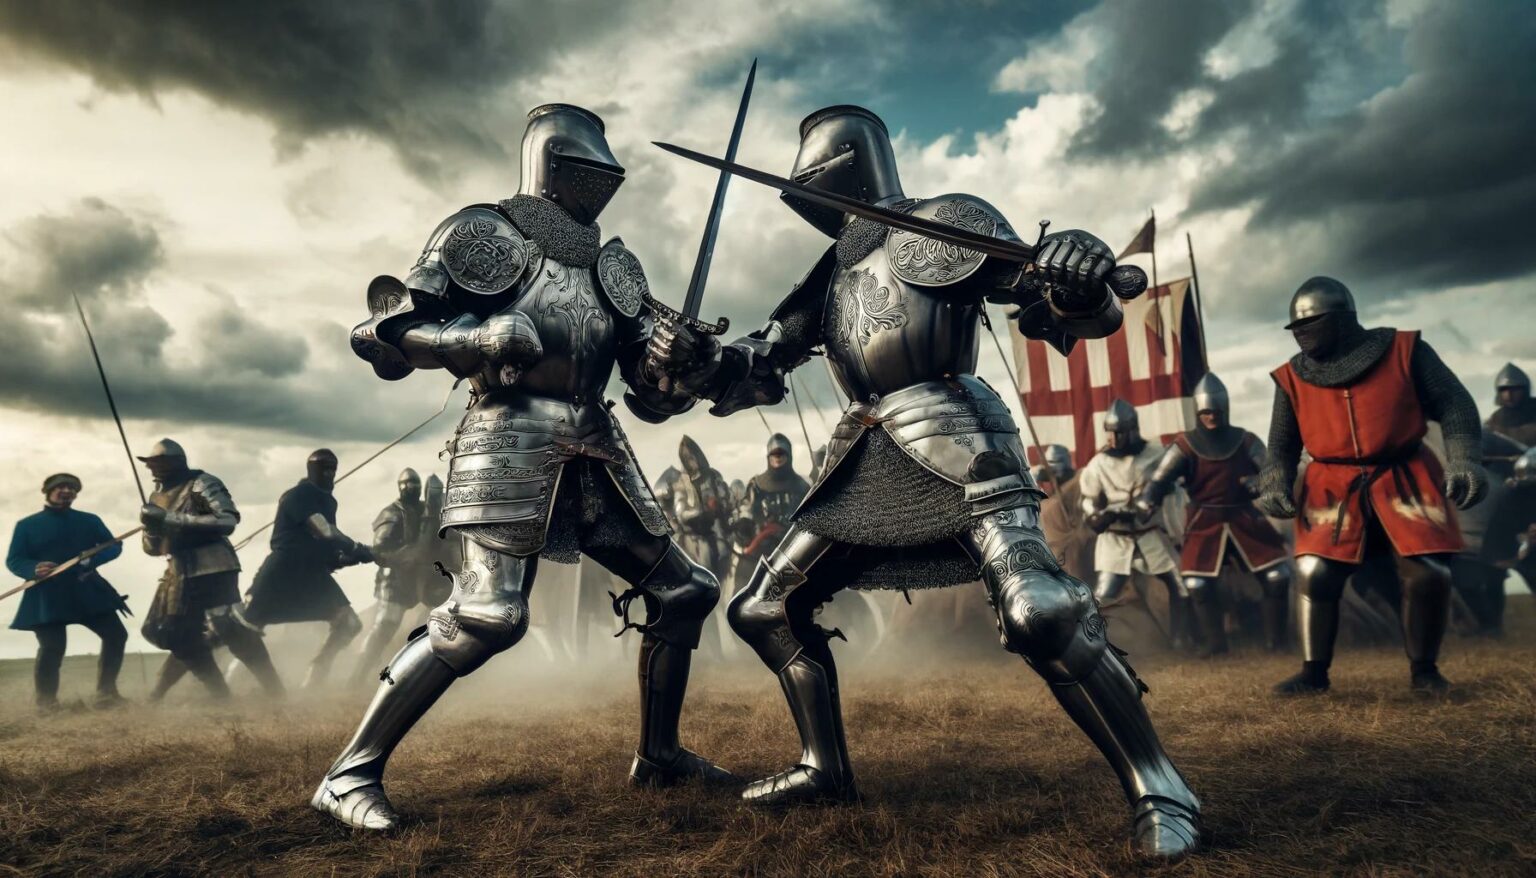 Best Material For Medieval Armor